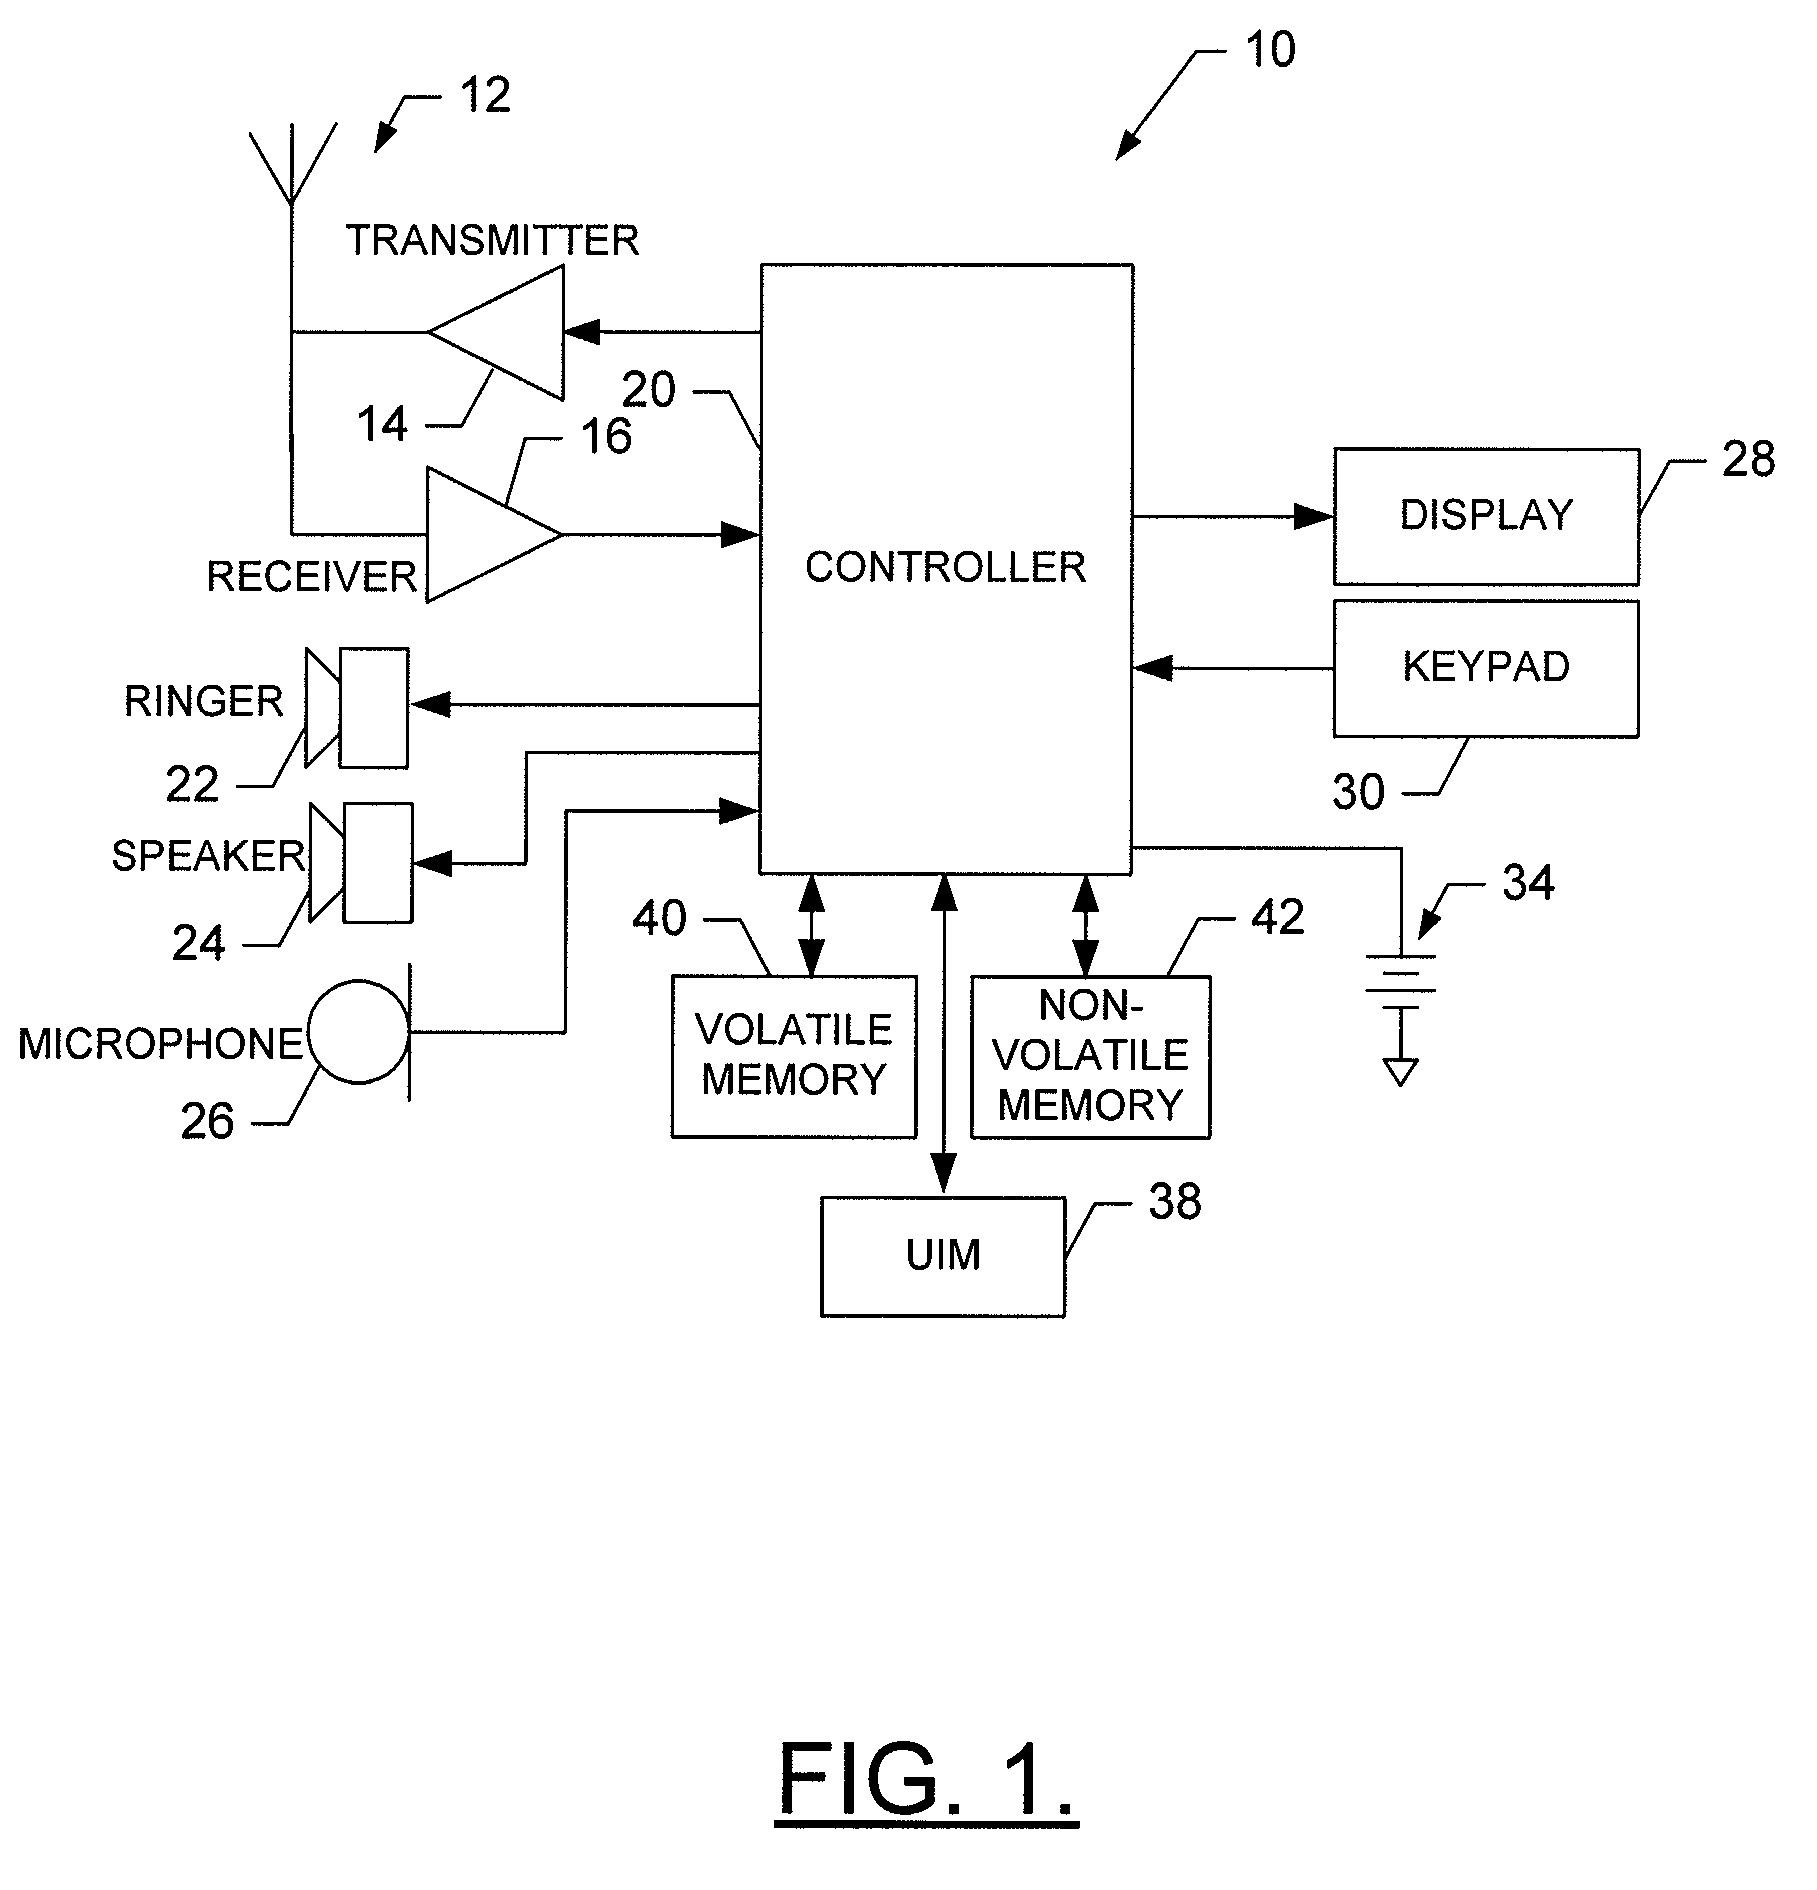 Method, apparatus and computer program product for providing an adaptive icon